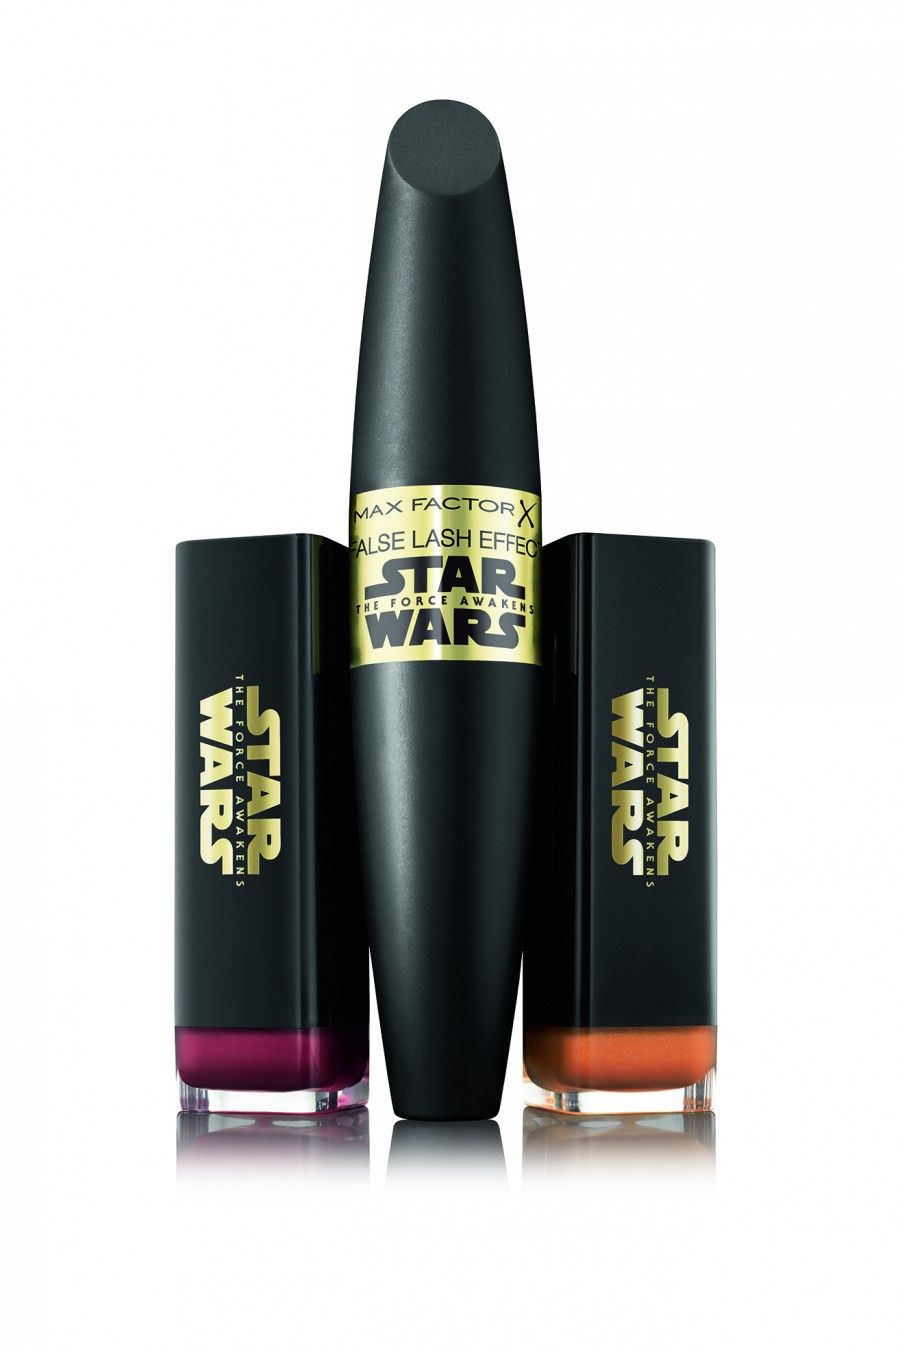 Max Factor Star Wars Limited Editions